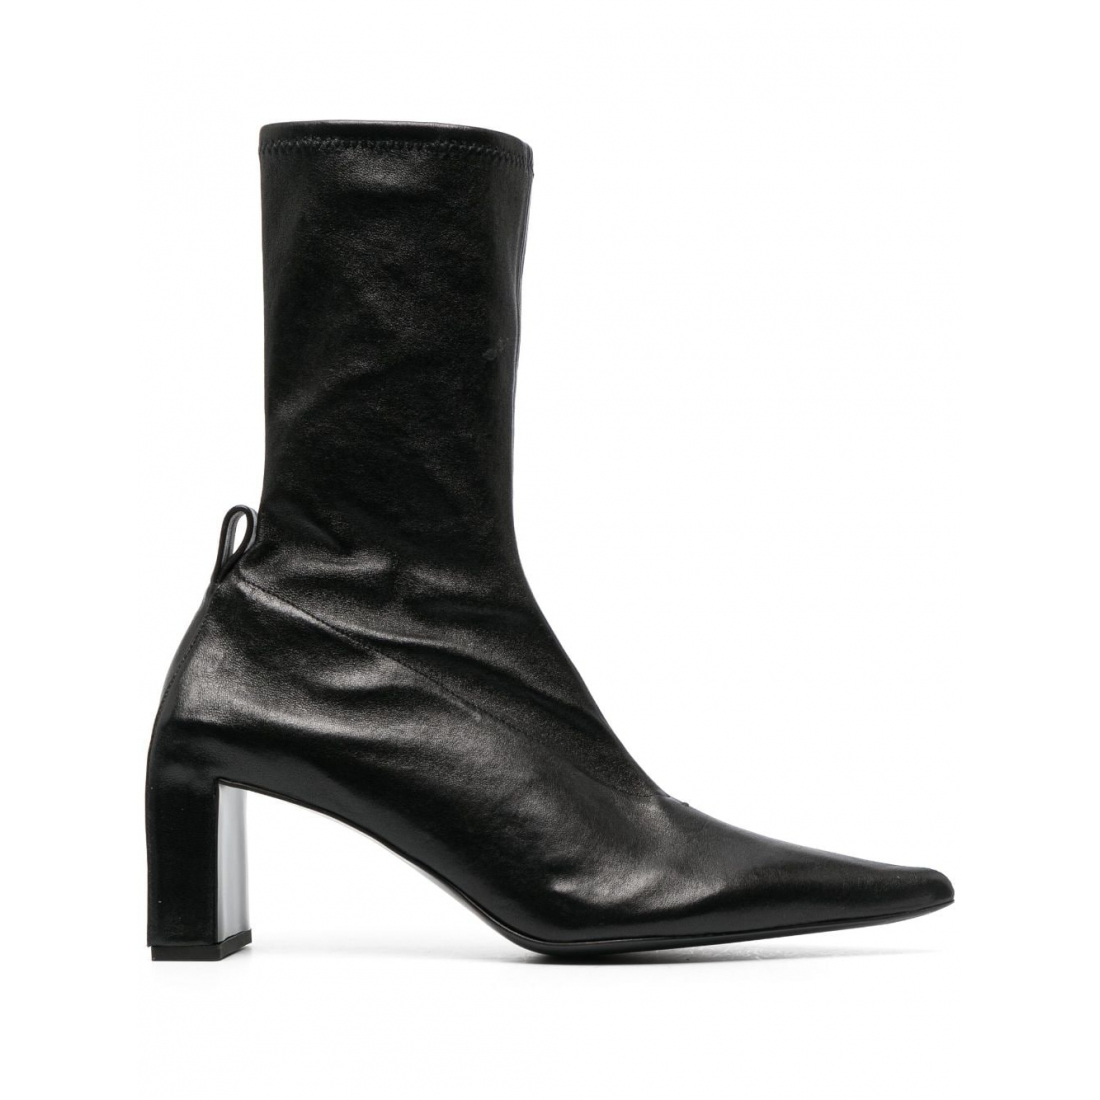 Women's 'Pointed-Toe' High Heeled Boots